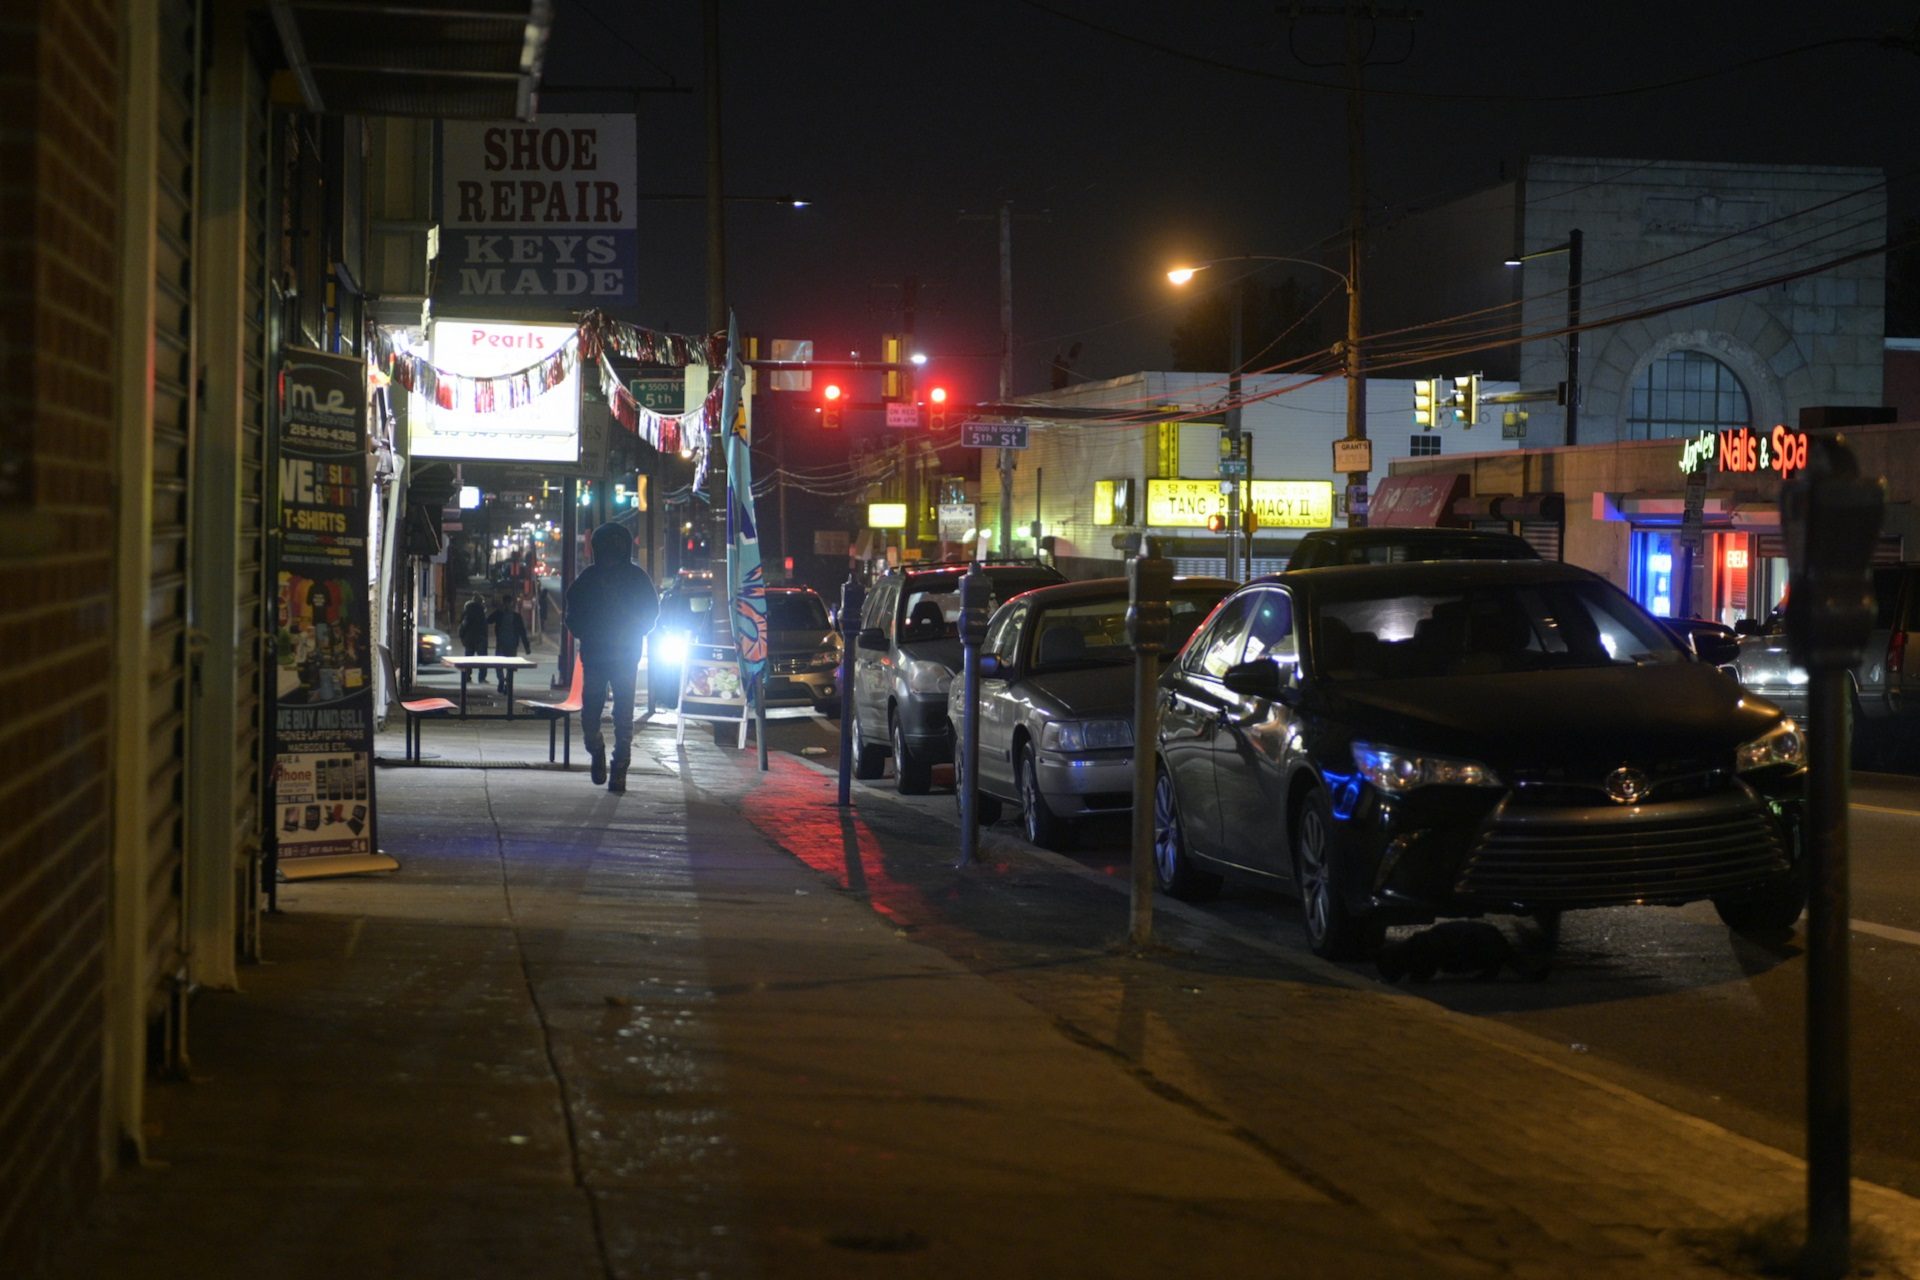 People stroll past shops as they close for the night at the commercial corridor on the 5500 block of North Fifth Street, on Tuesday.